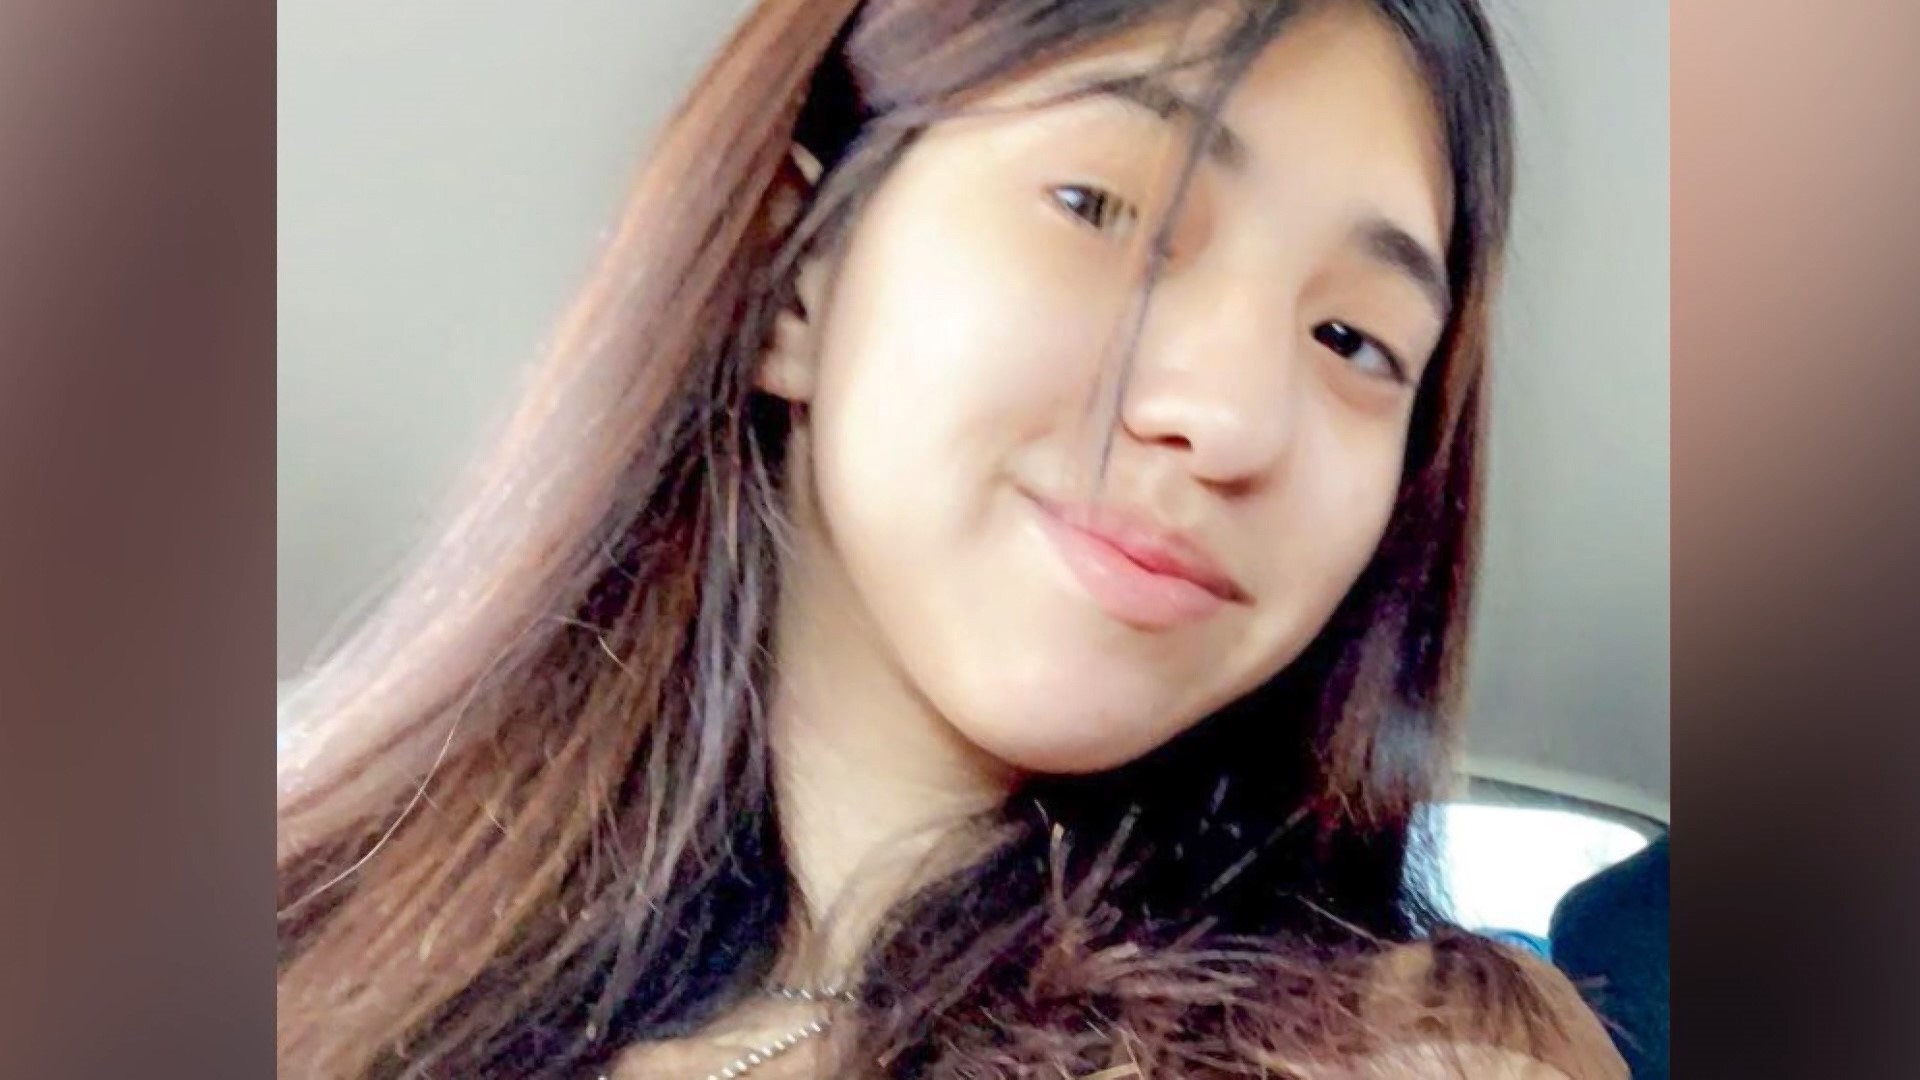 Three weeks ago, 14-year-old Ama Cardenas was killed in a hit-and-run. Now, Ema's sister Nayelli Sandoval says Ema's phone was stolen from the scene.